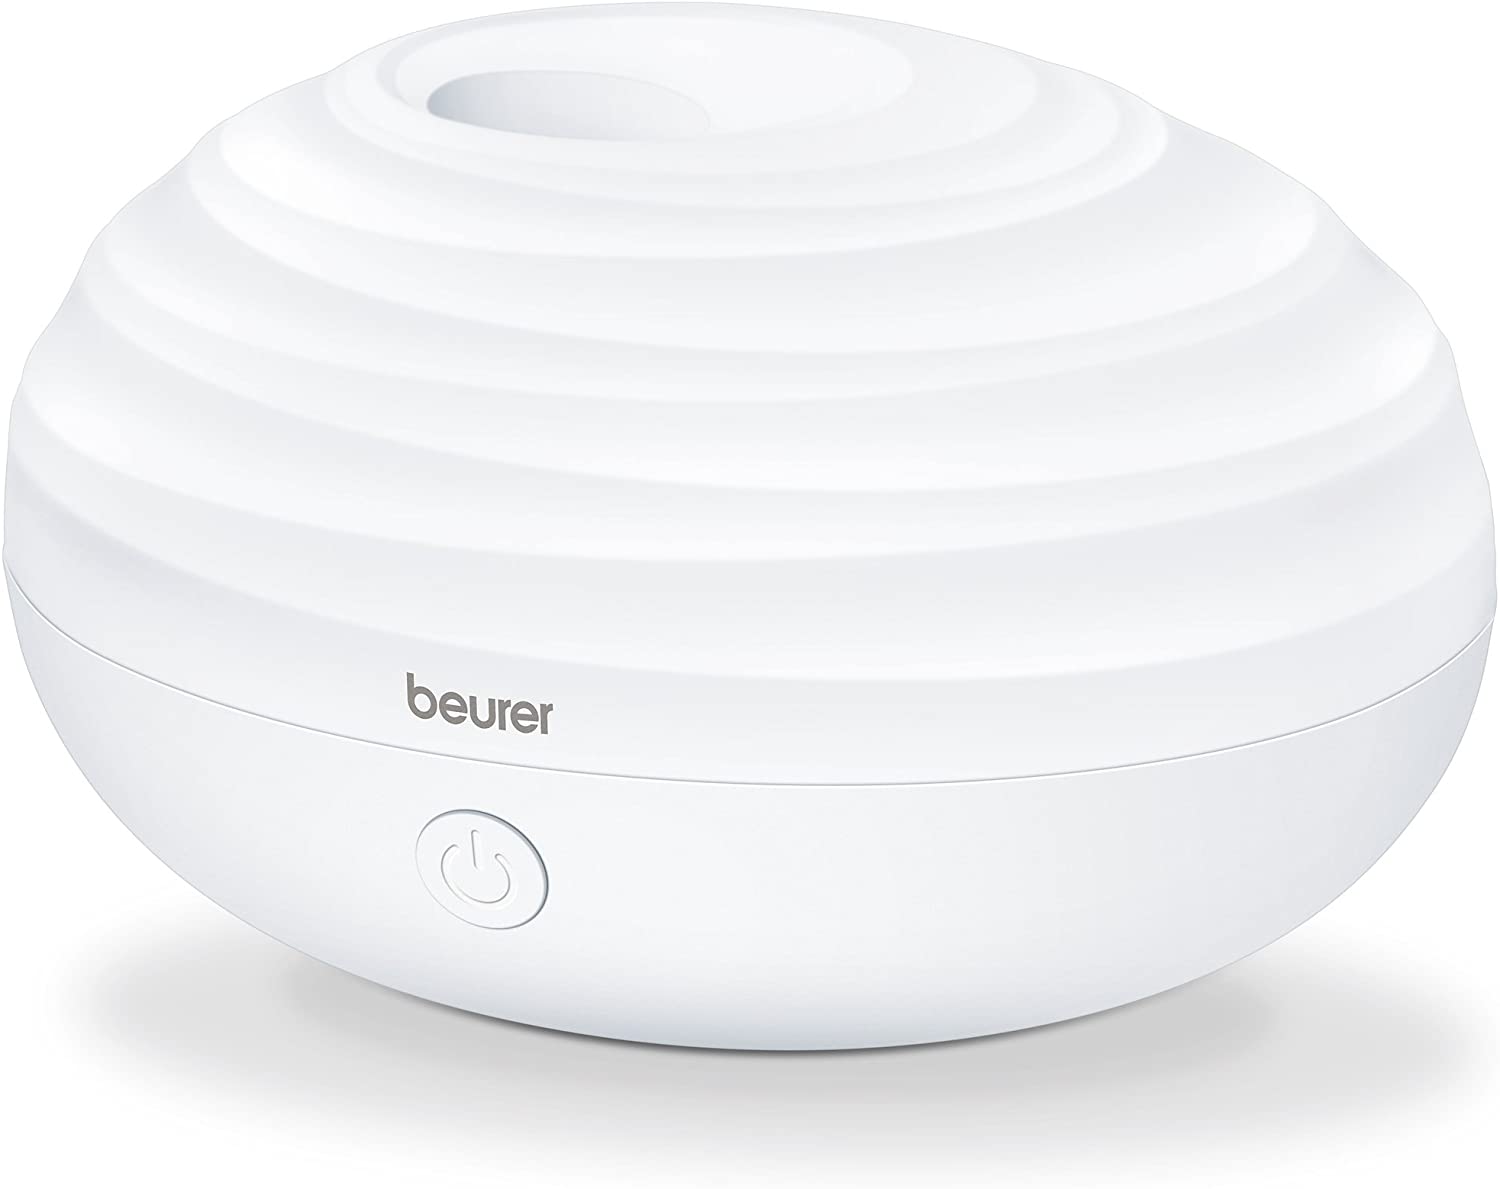 Beurer La 20 Aroma Diffuser + With Aroma Oil Vitality + With Aroma Oil Rela